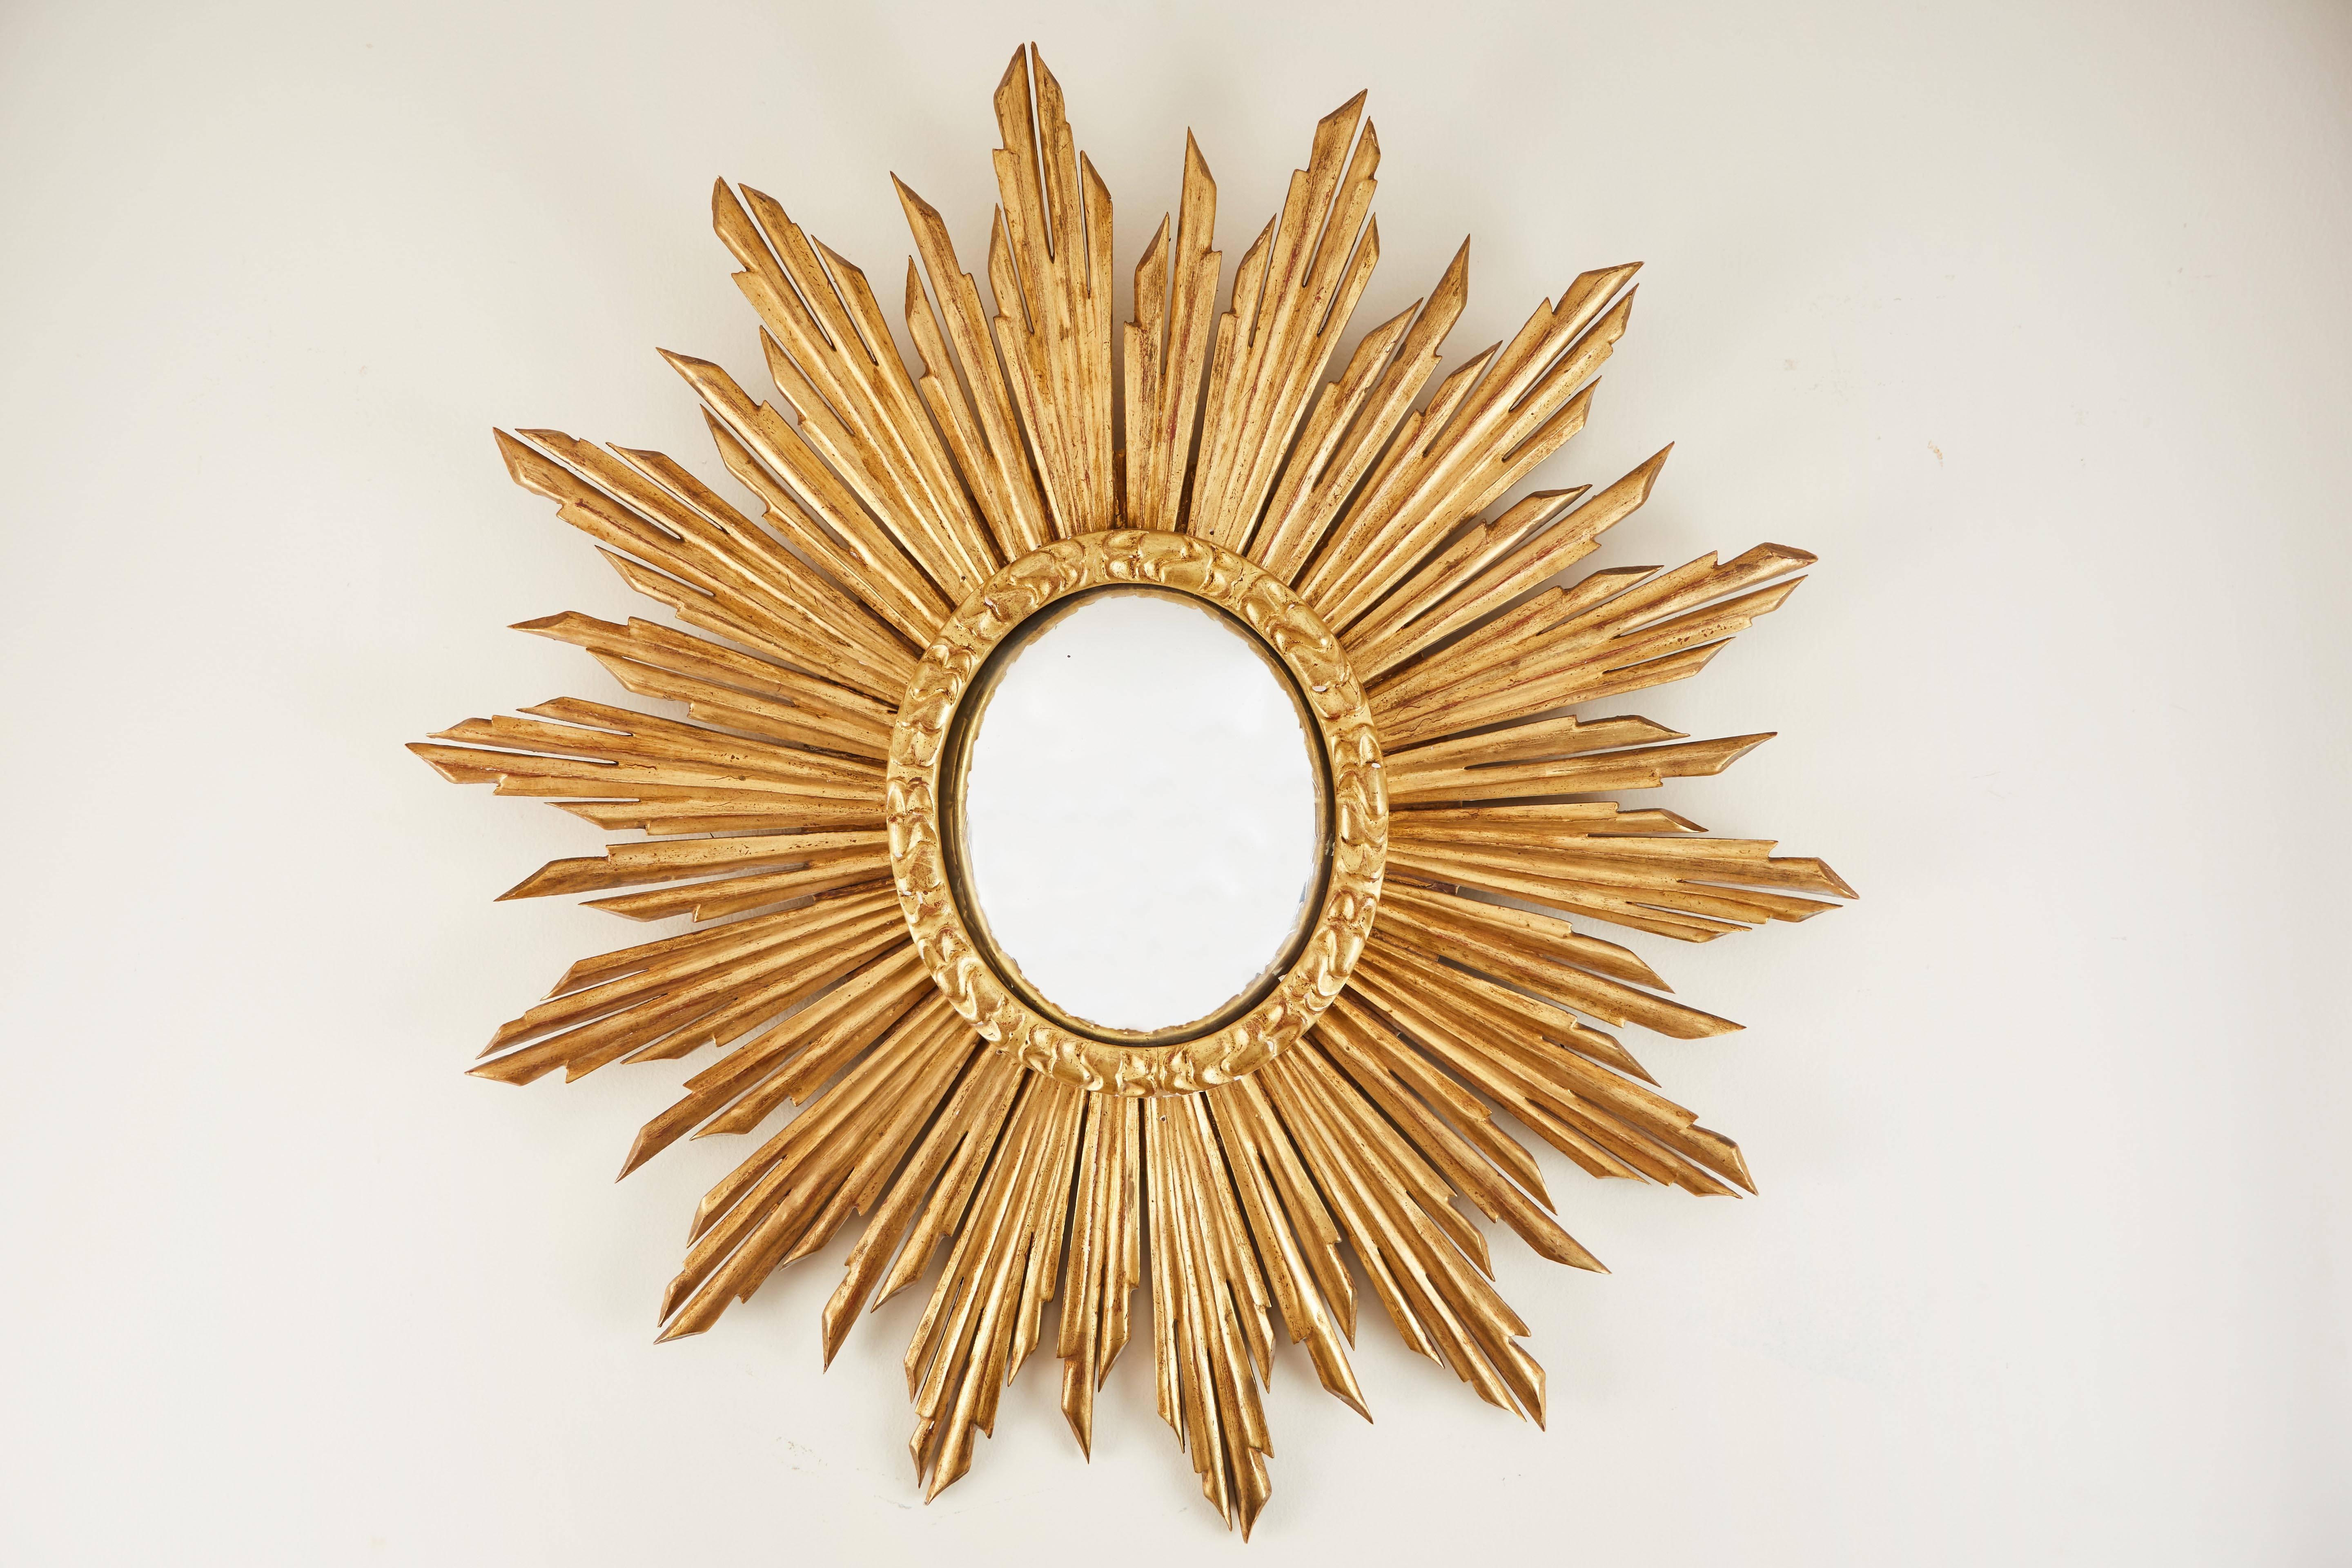 Very nice pair of gilded Italian sun mirrors,
late 20th century, with convex mirrors.
Sold as a pair.